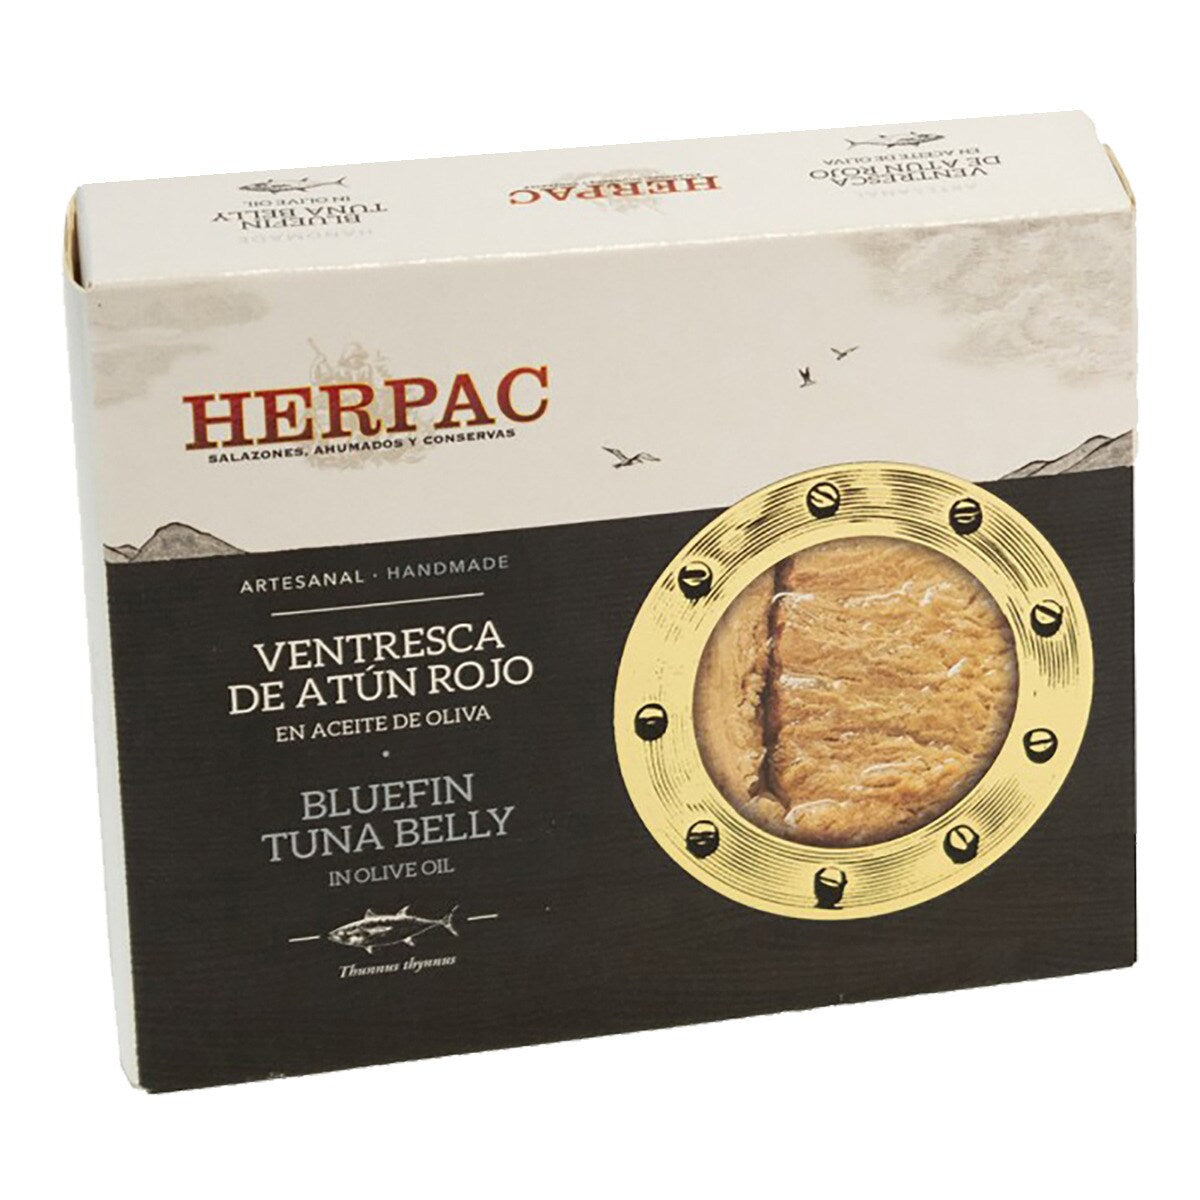 Herpac Red Tuna Belly in Olive Oil 120g